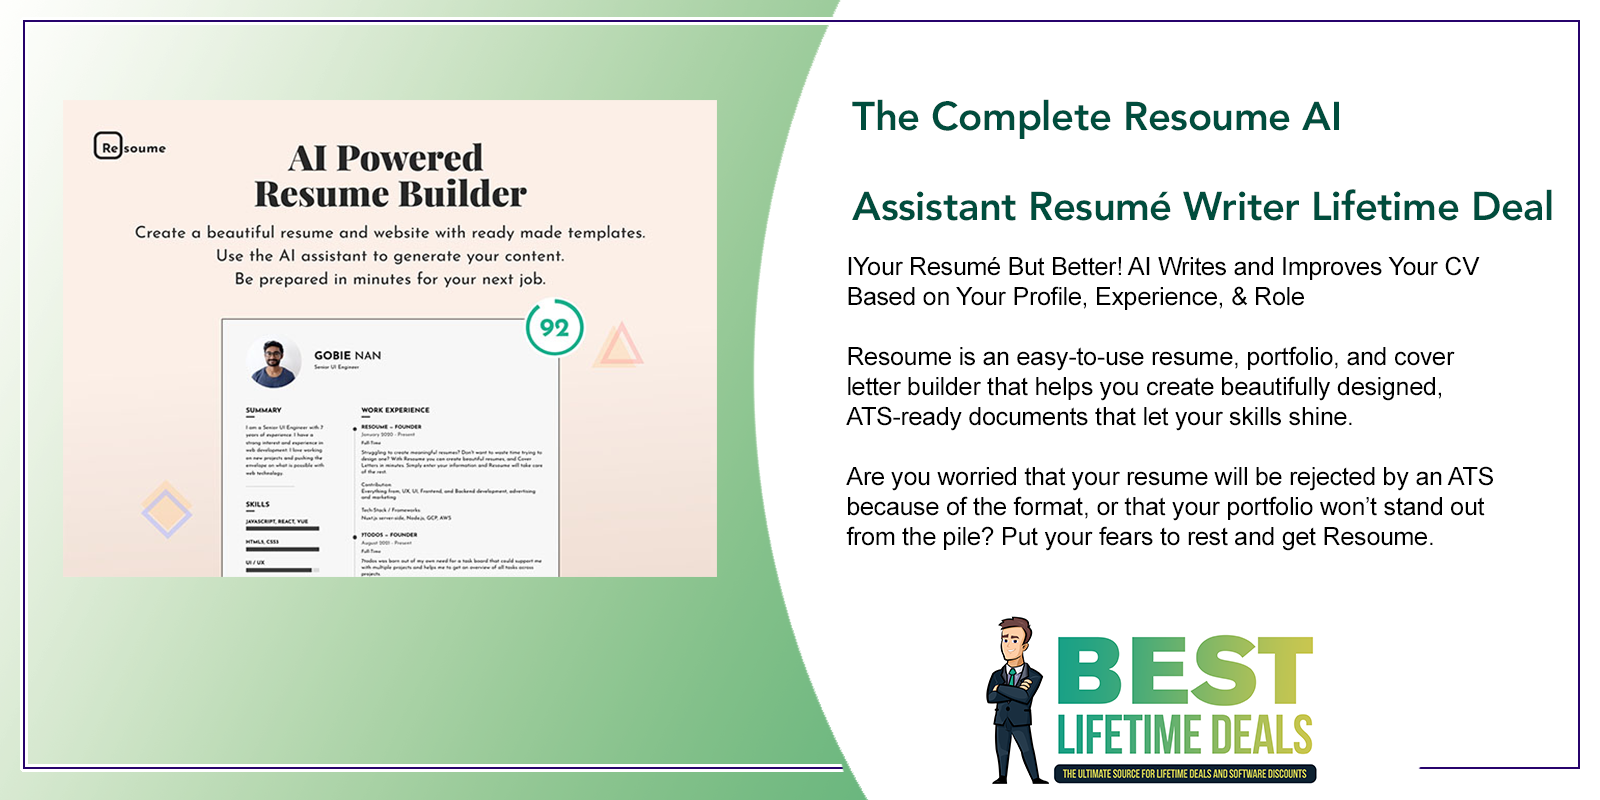 The Complete Resoume AI Assistant Resume Writer Lifetime Deal Featured Image